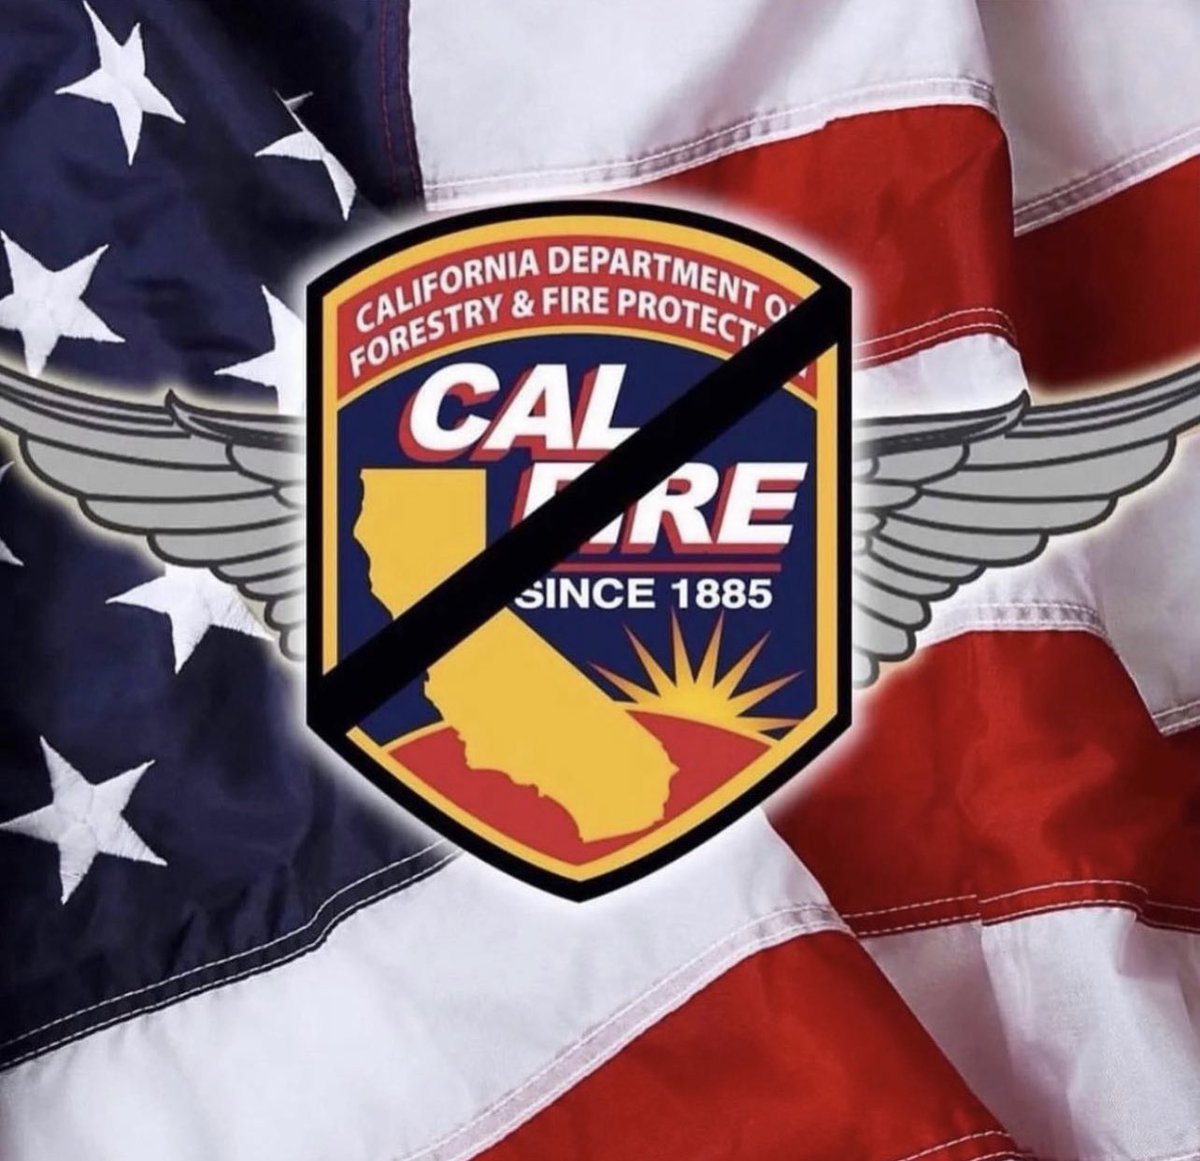 May God Bless @CAL_FIRE Local 2881 members Division Chief Josh Bischof and Fire Captain Tim Rodriguez, and their pilot, who died in last night's crash in Southern California.